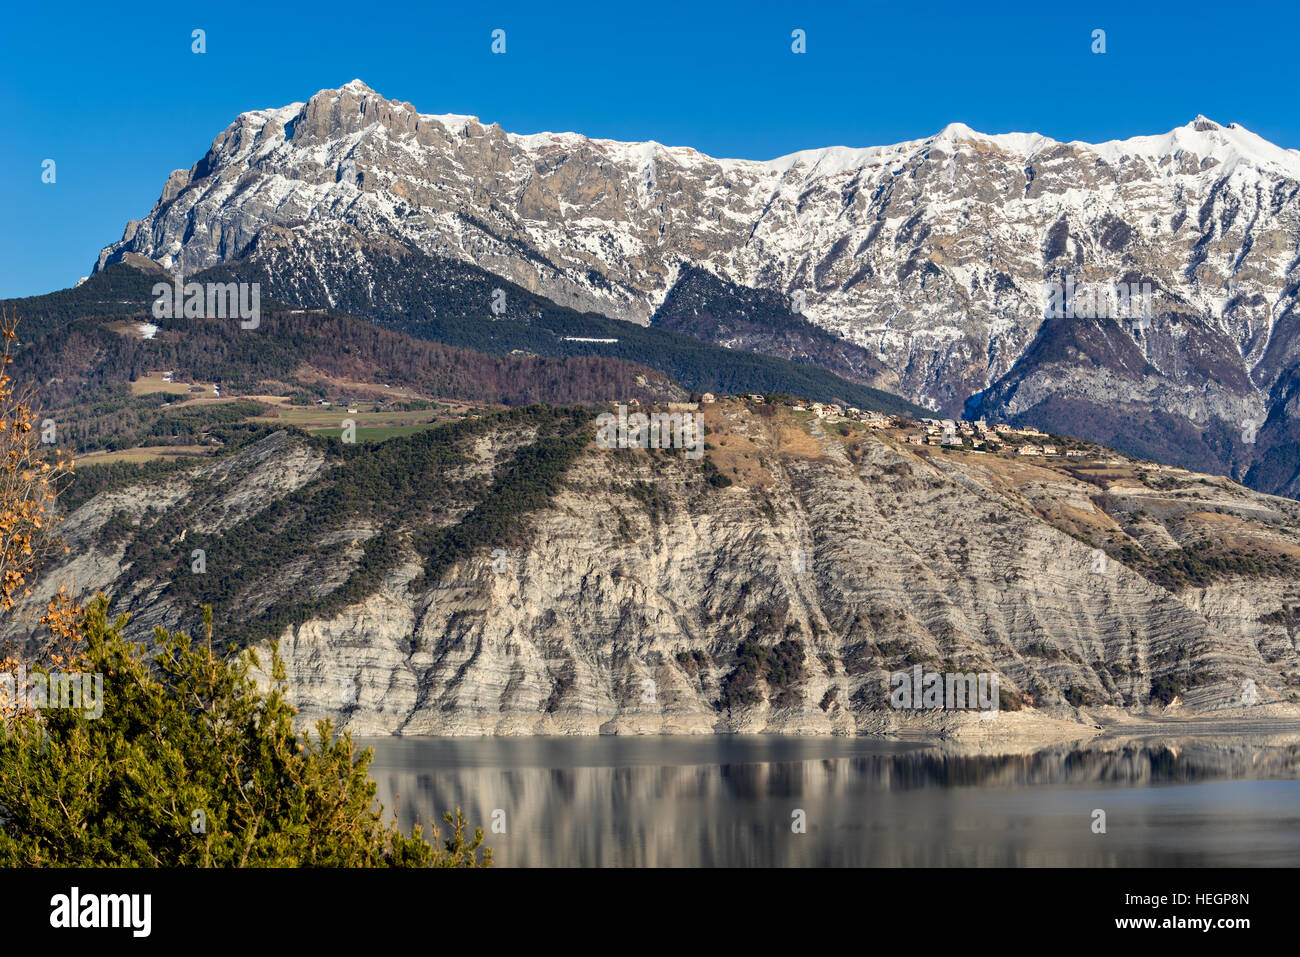 Village of Sauze  du Lac with the Grand Morgon peak and Serre Poncon Lake in winter. Hautes-Alpes, French Alps, France Stock Photo